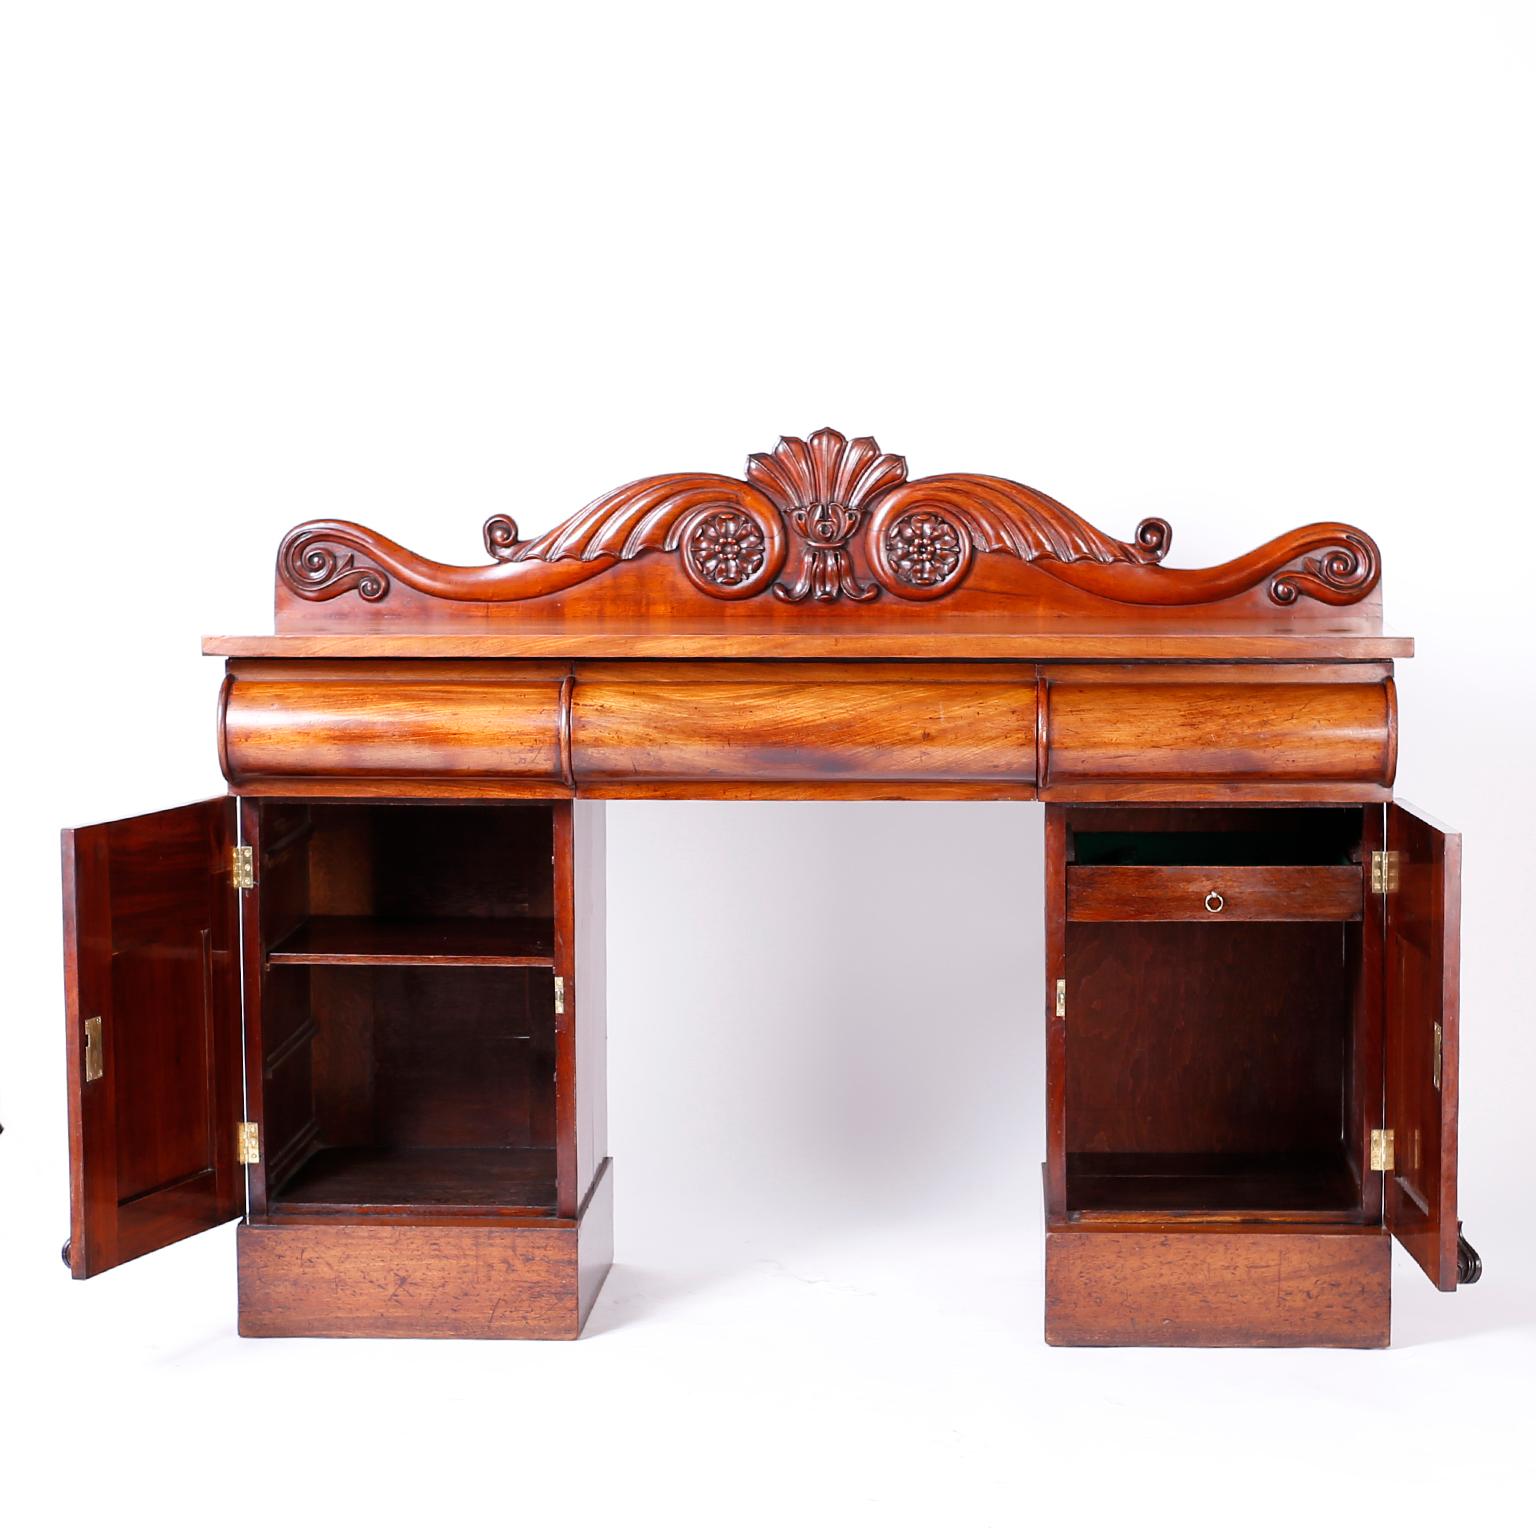 Antiguan British Colonial Style Sideboard or Server For Sale